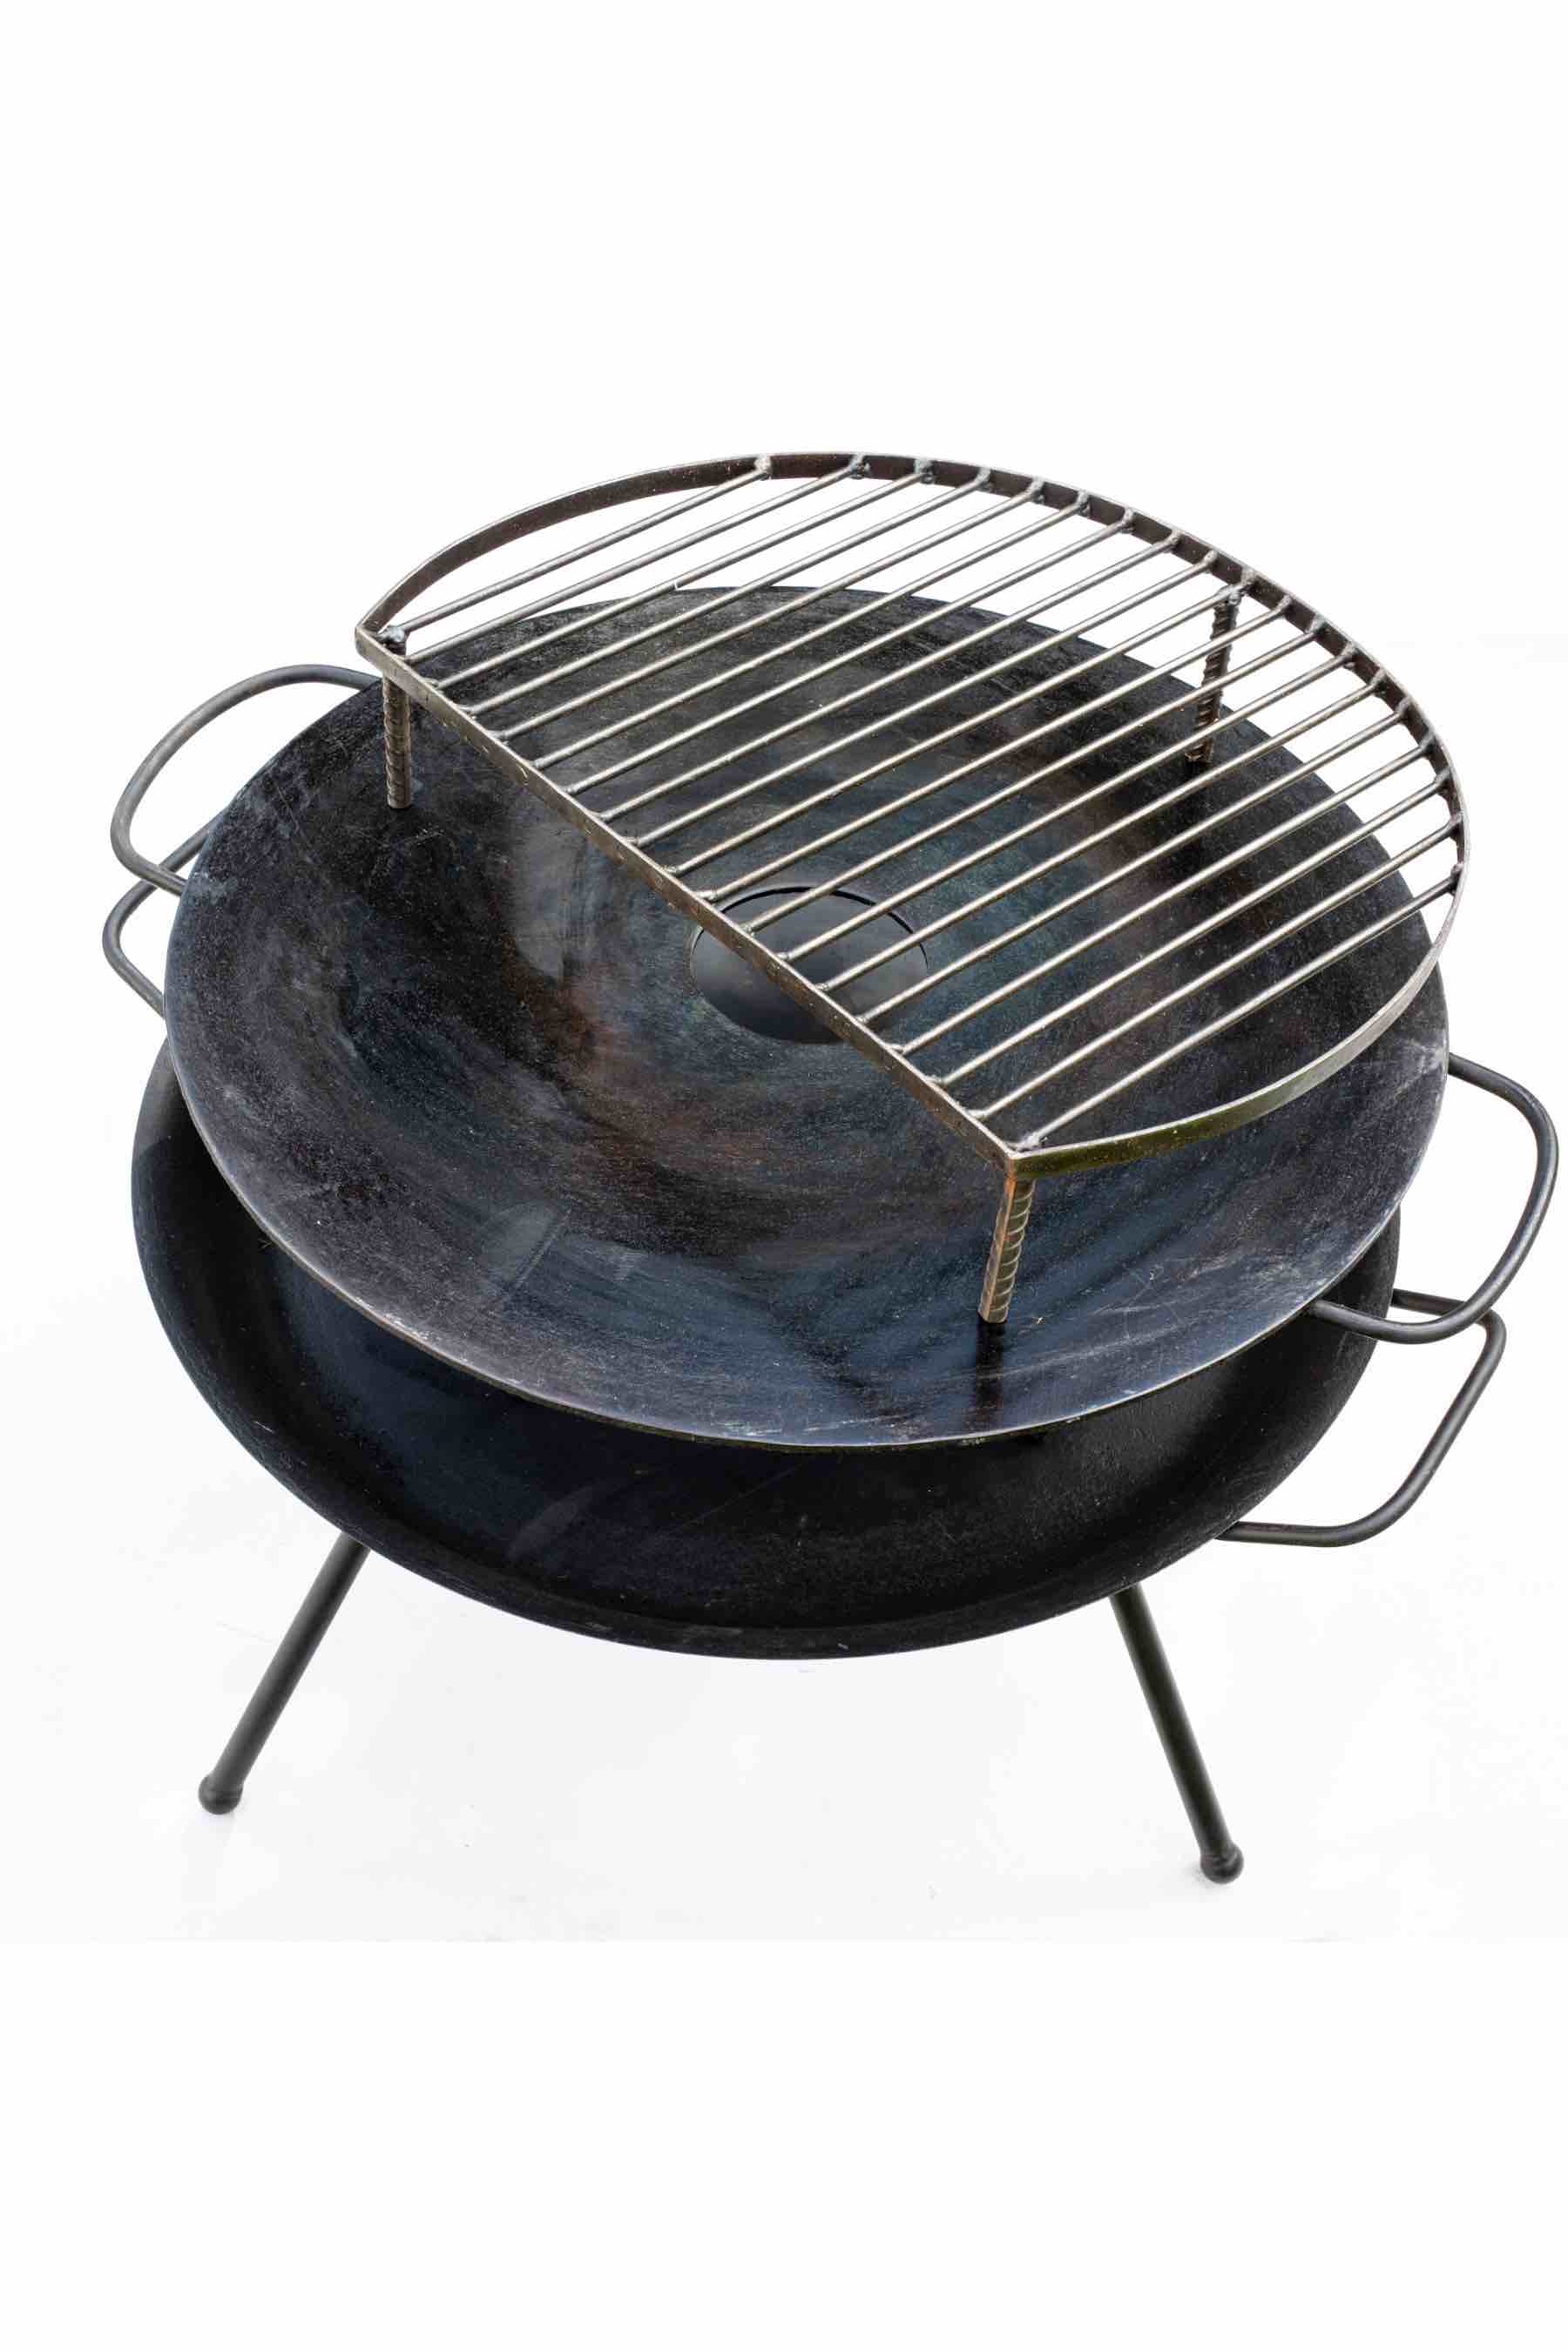 https://vargasbrothersfirepits.co.uk/cdn/shop/products/vargas-brothers-fire-pits-arado-grill-for-fire-pits-1-min_ec29a6b2-7dea-44f2-9fe7-f99347ca849c.jpg?v=1677849750&width=1946